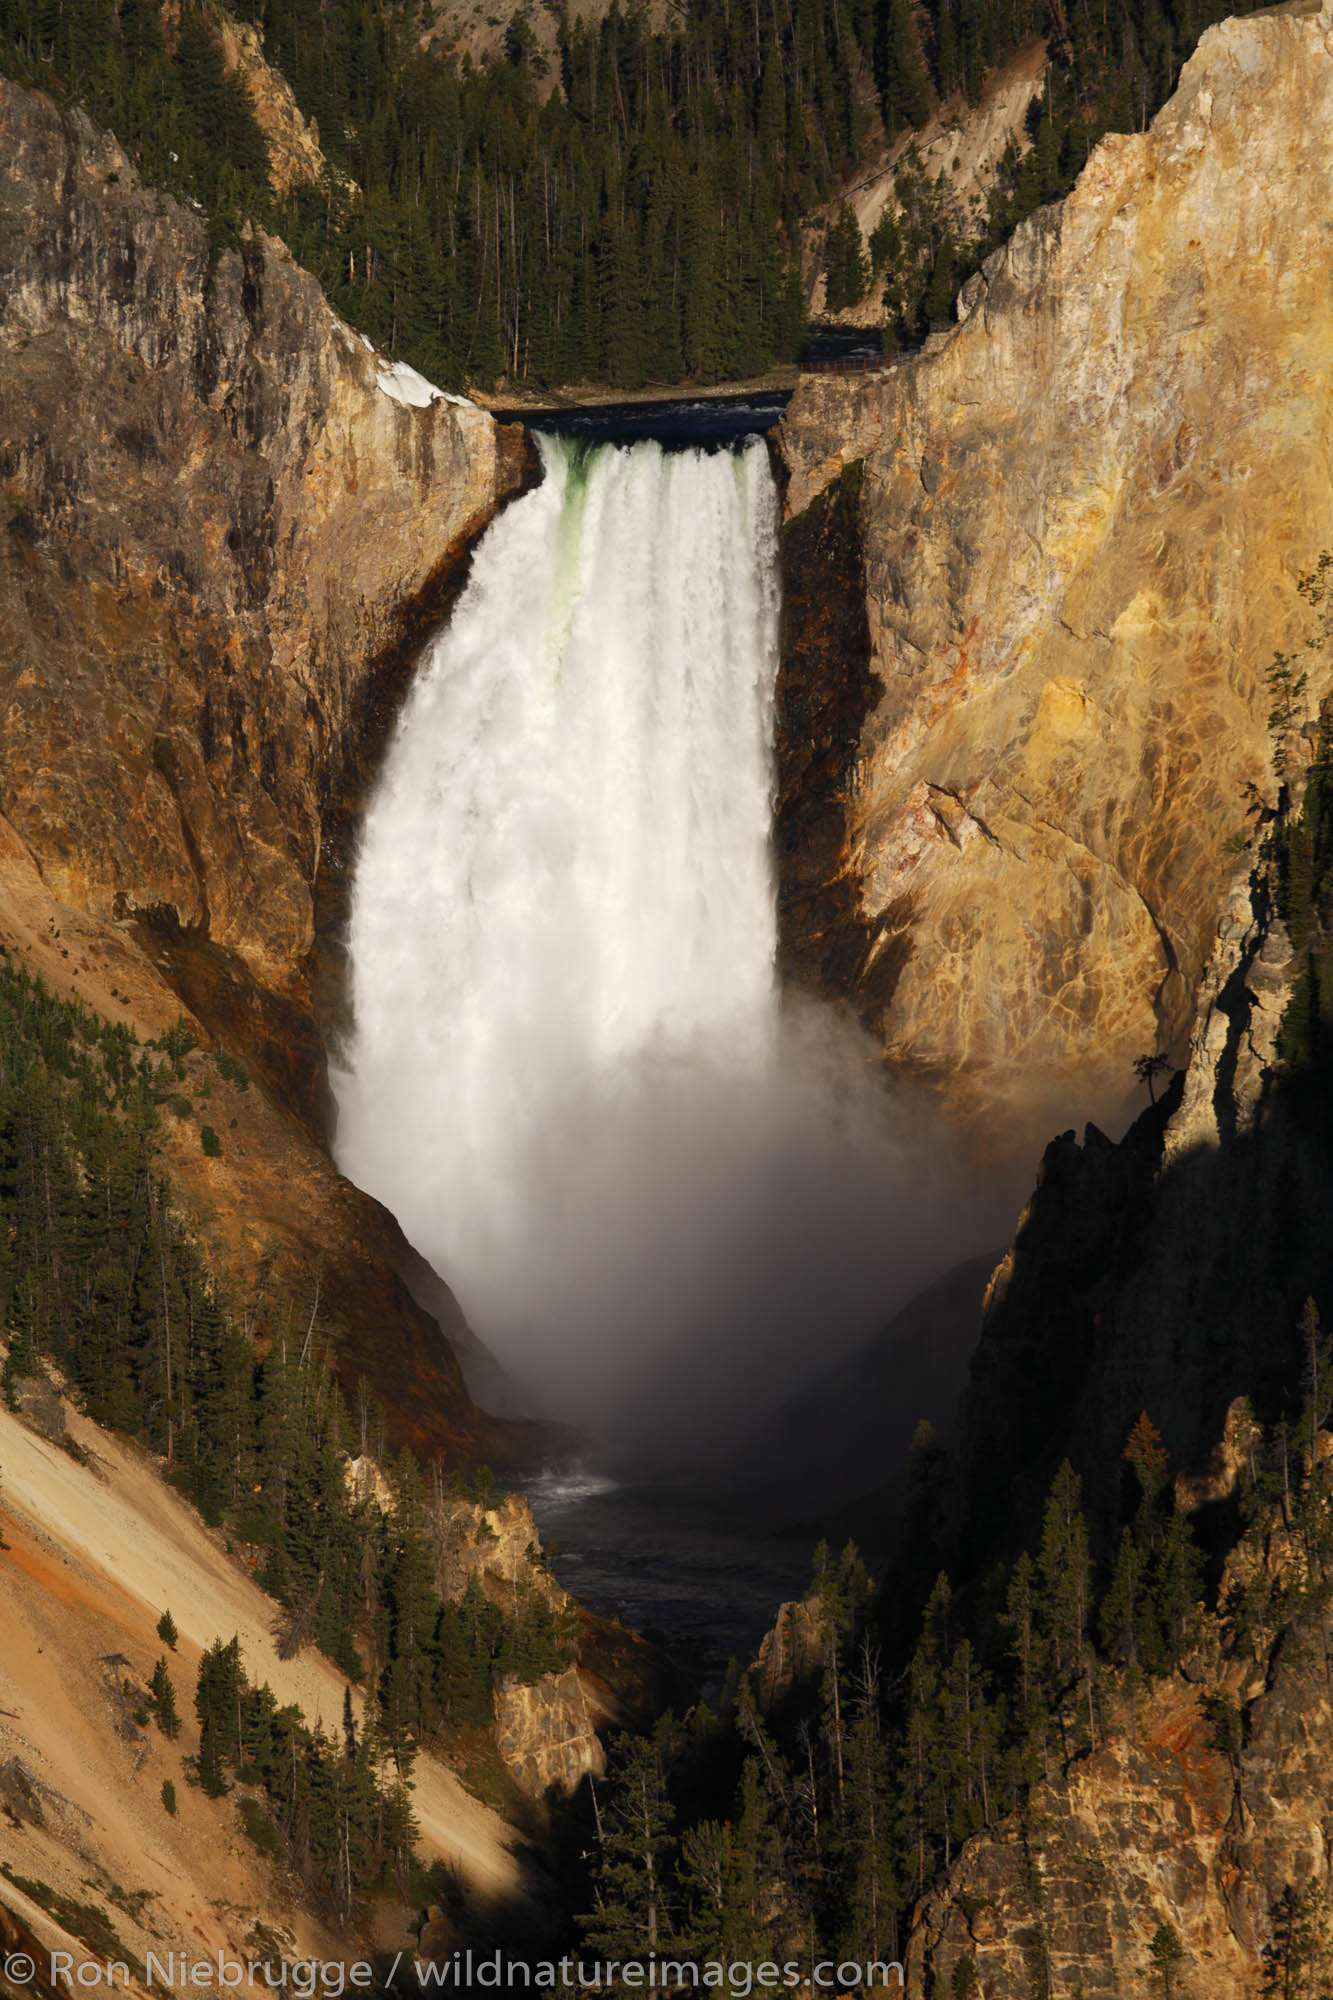 The Lower Falls of the Grand Canyon from Artist Point, Yellowstone National Park, Wyoming.